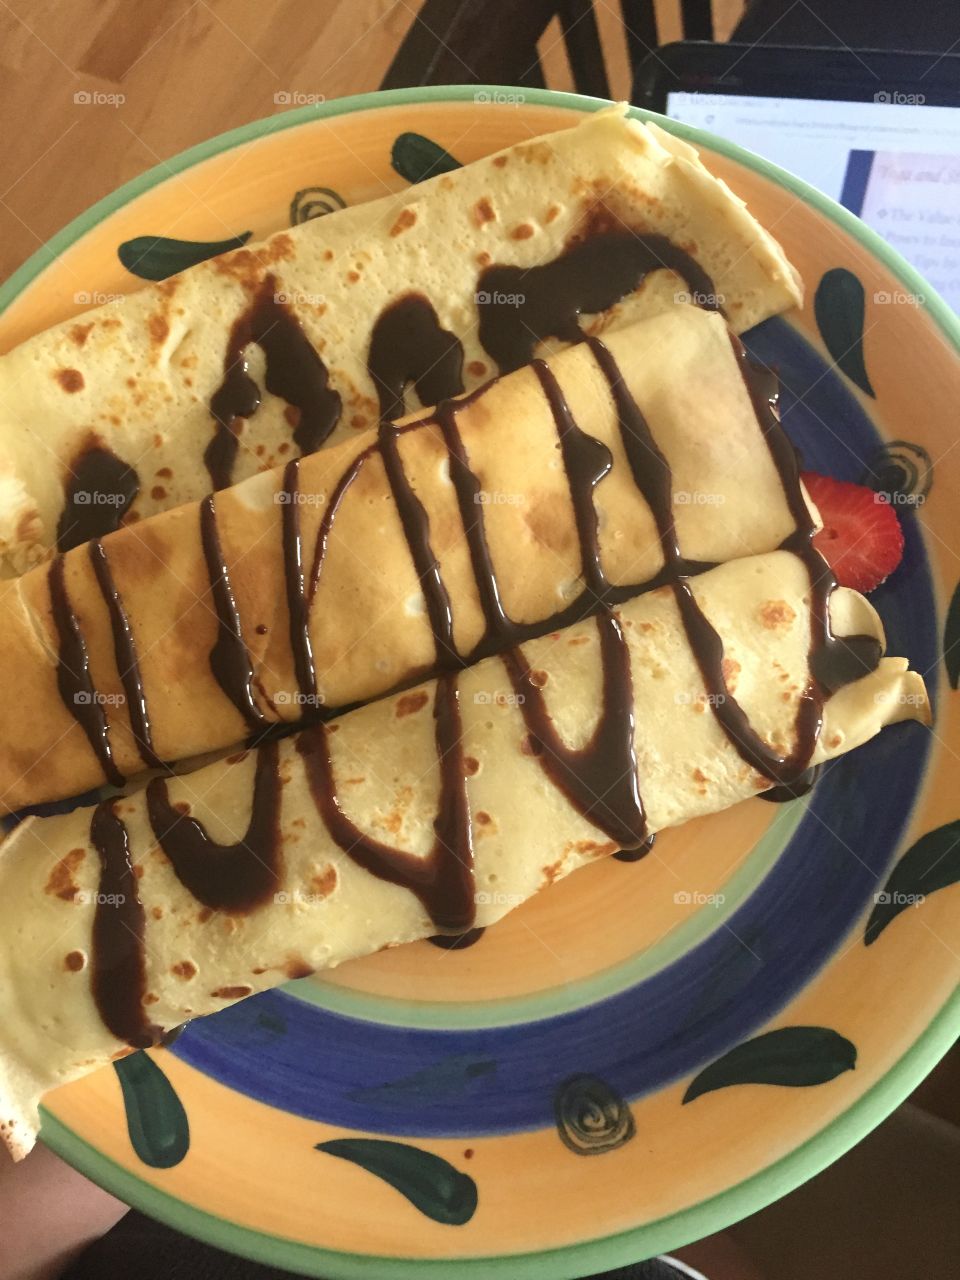 What better way to start the weekend than with some homemade crepes? ❤😍🥞🍽